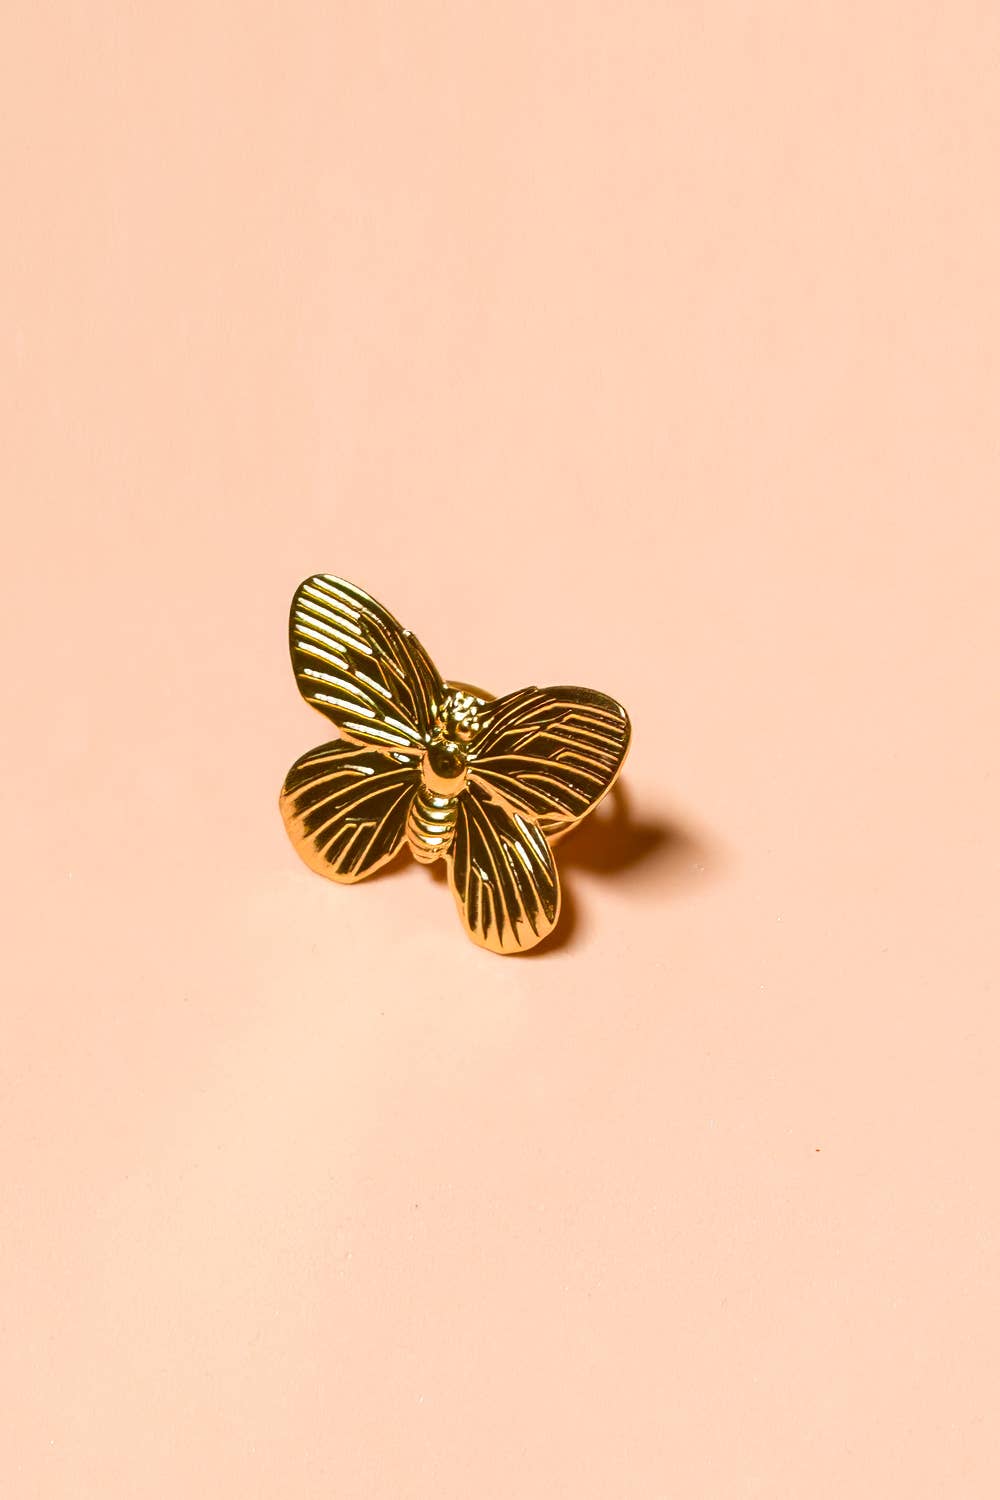 I'll Fly Away Ring - 18K Gold Plated - Out of the Blue